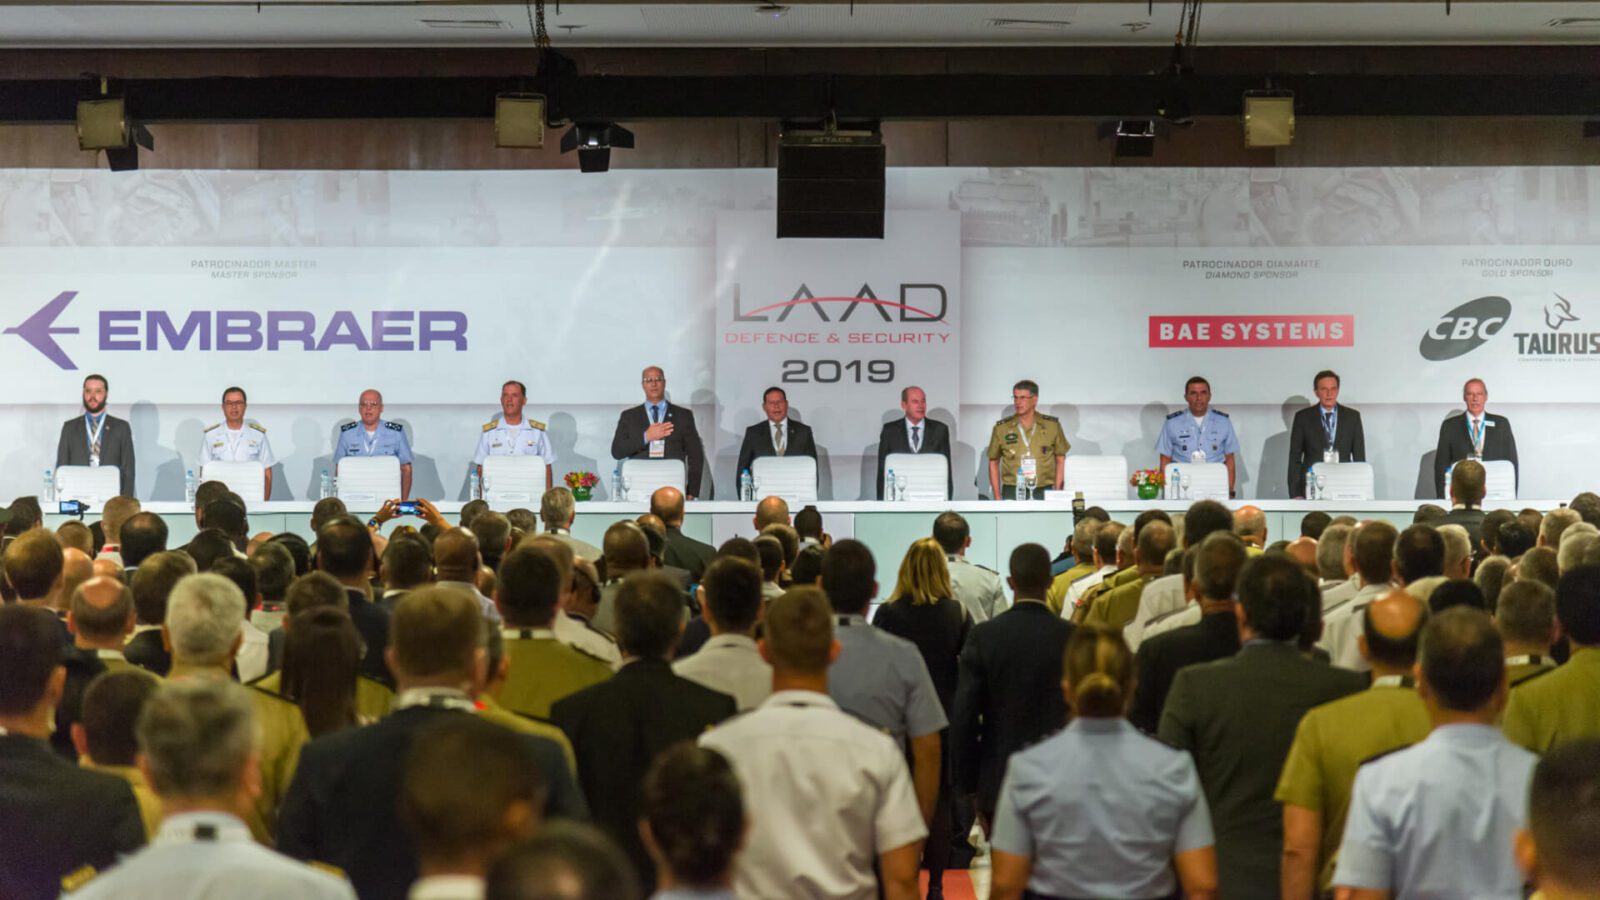 Defense and Security: Leading global brands confirm their presence at LAAD 2023